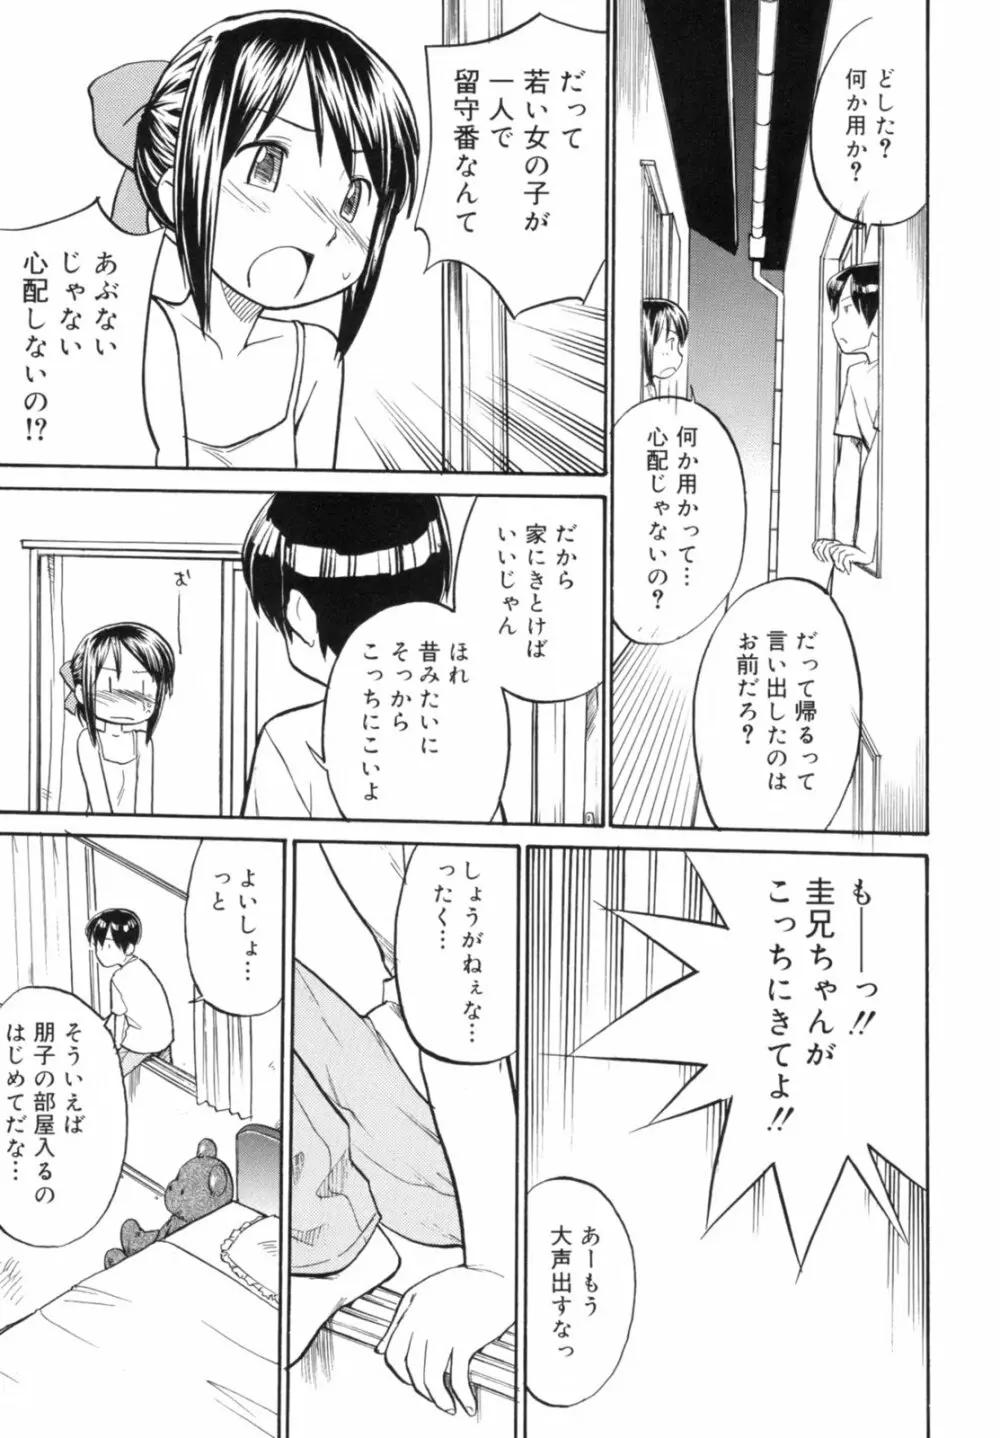 Read me　リード・ミー！ Page.45